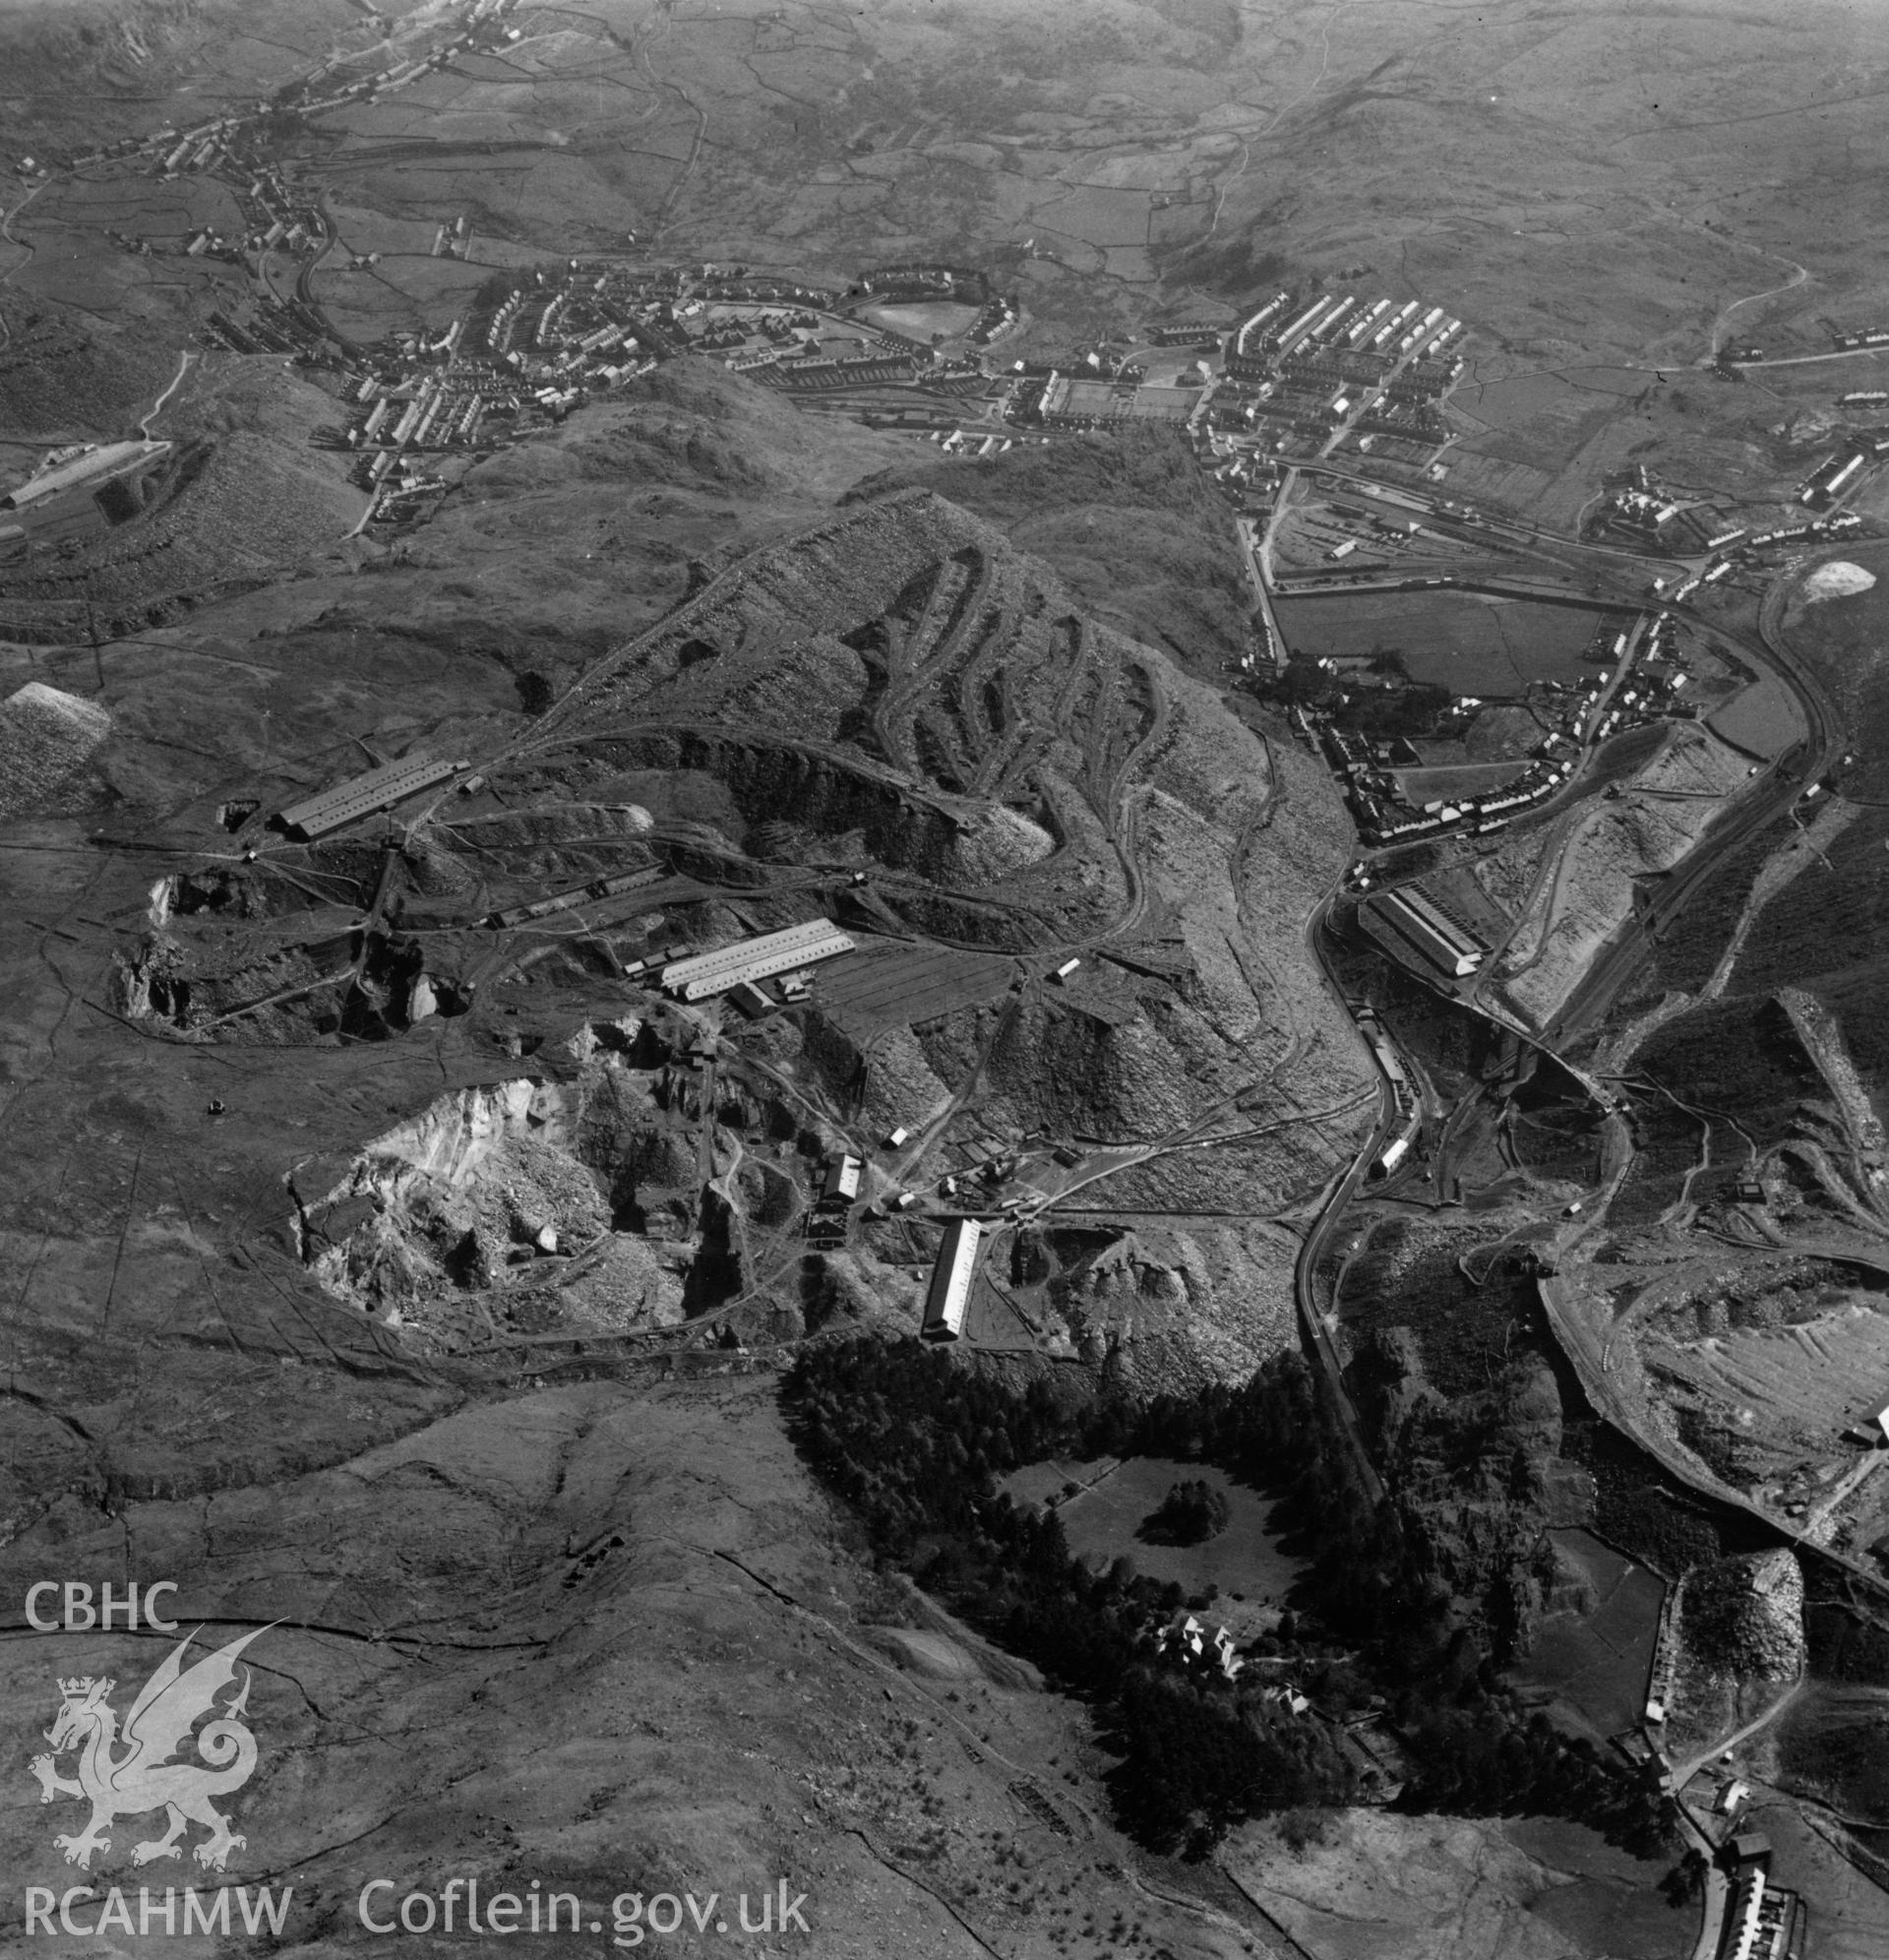 View of Oakley Slate quarries Co. Ltd., with distant view of Maenofferen. Oblique aerial photograph, 5?" cut roll film.